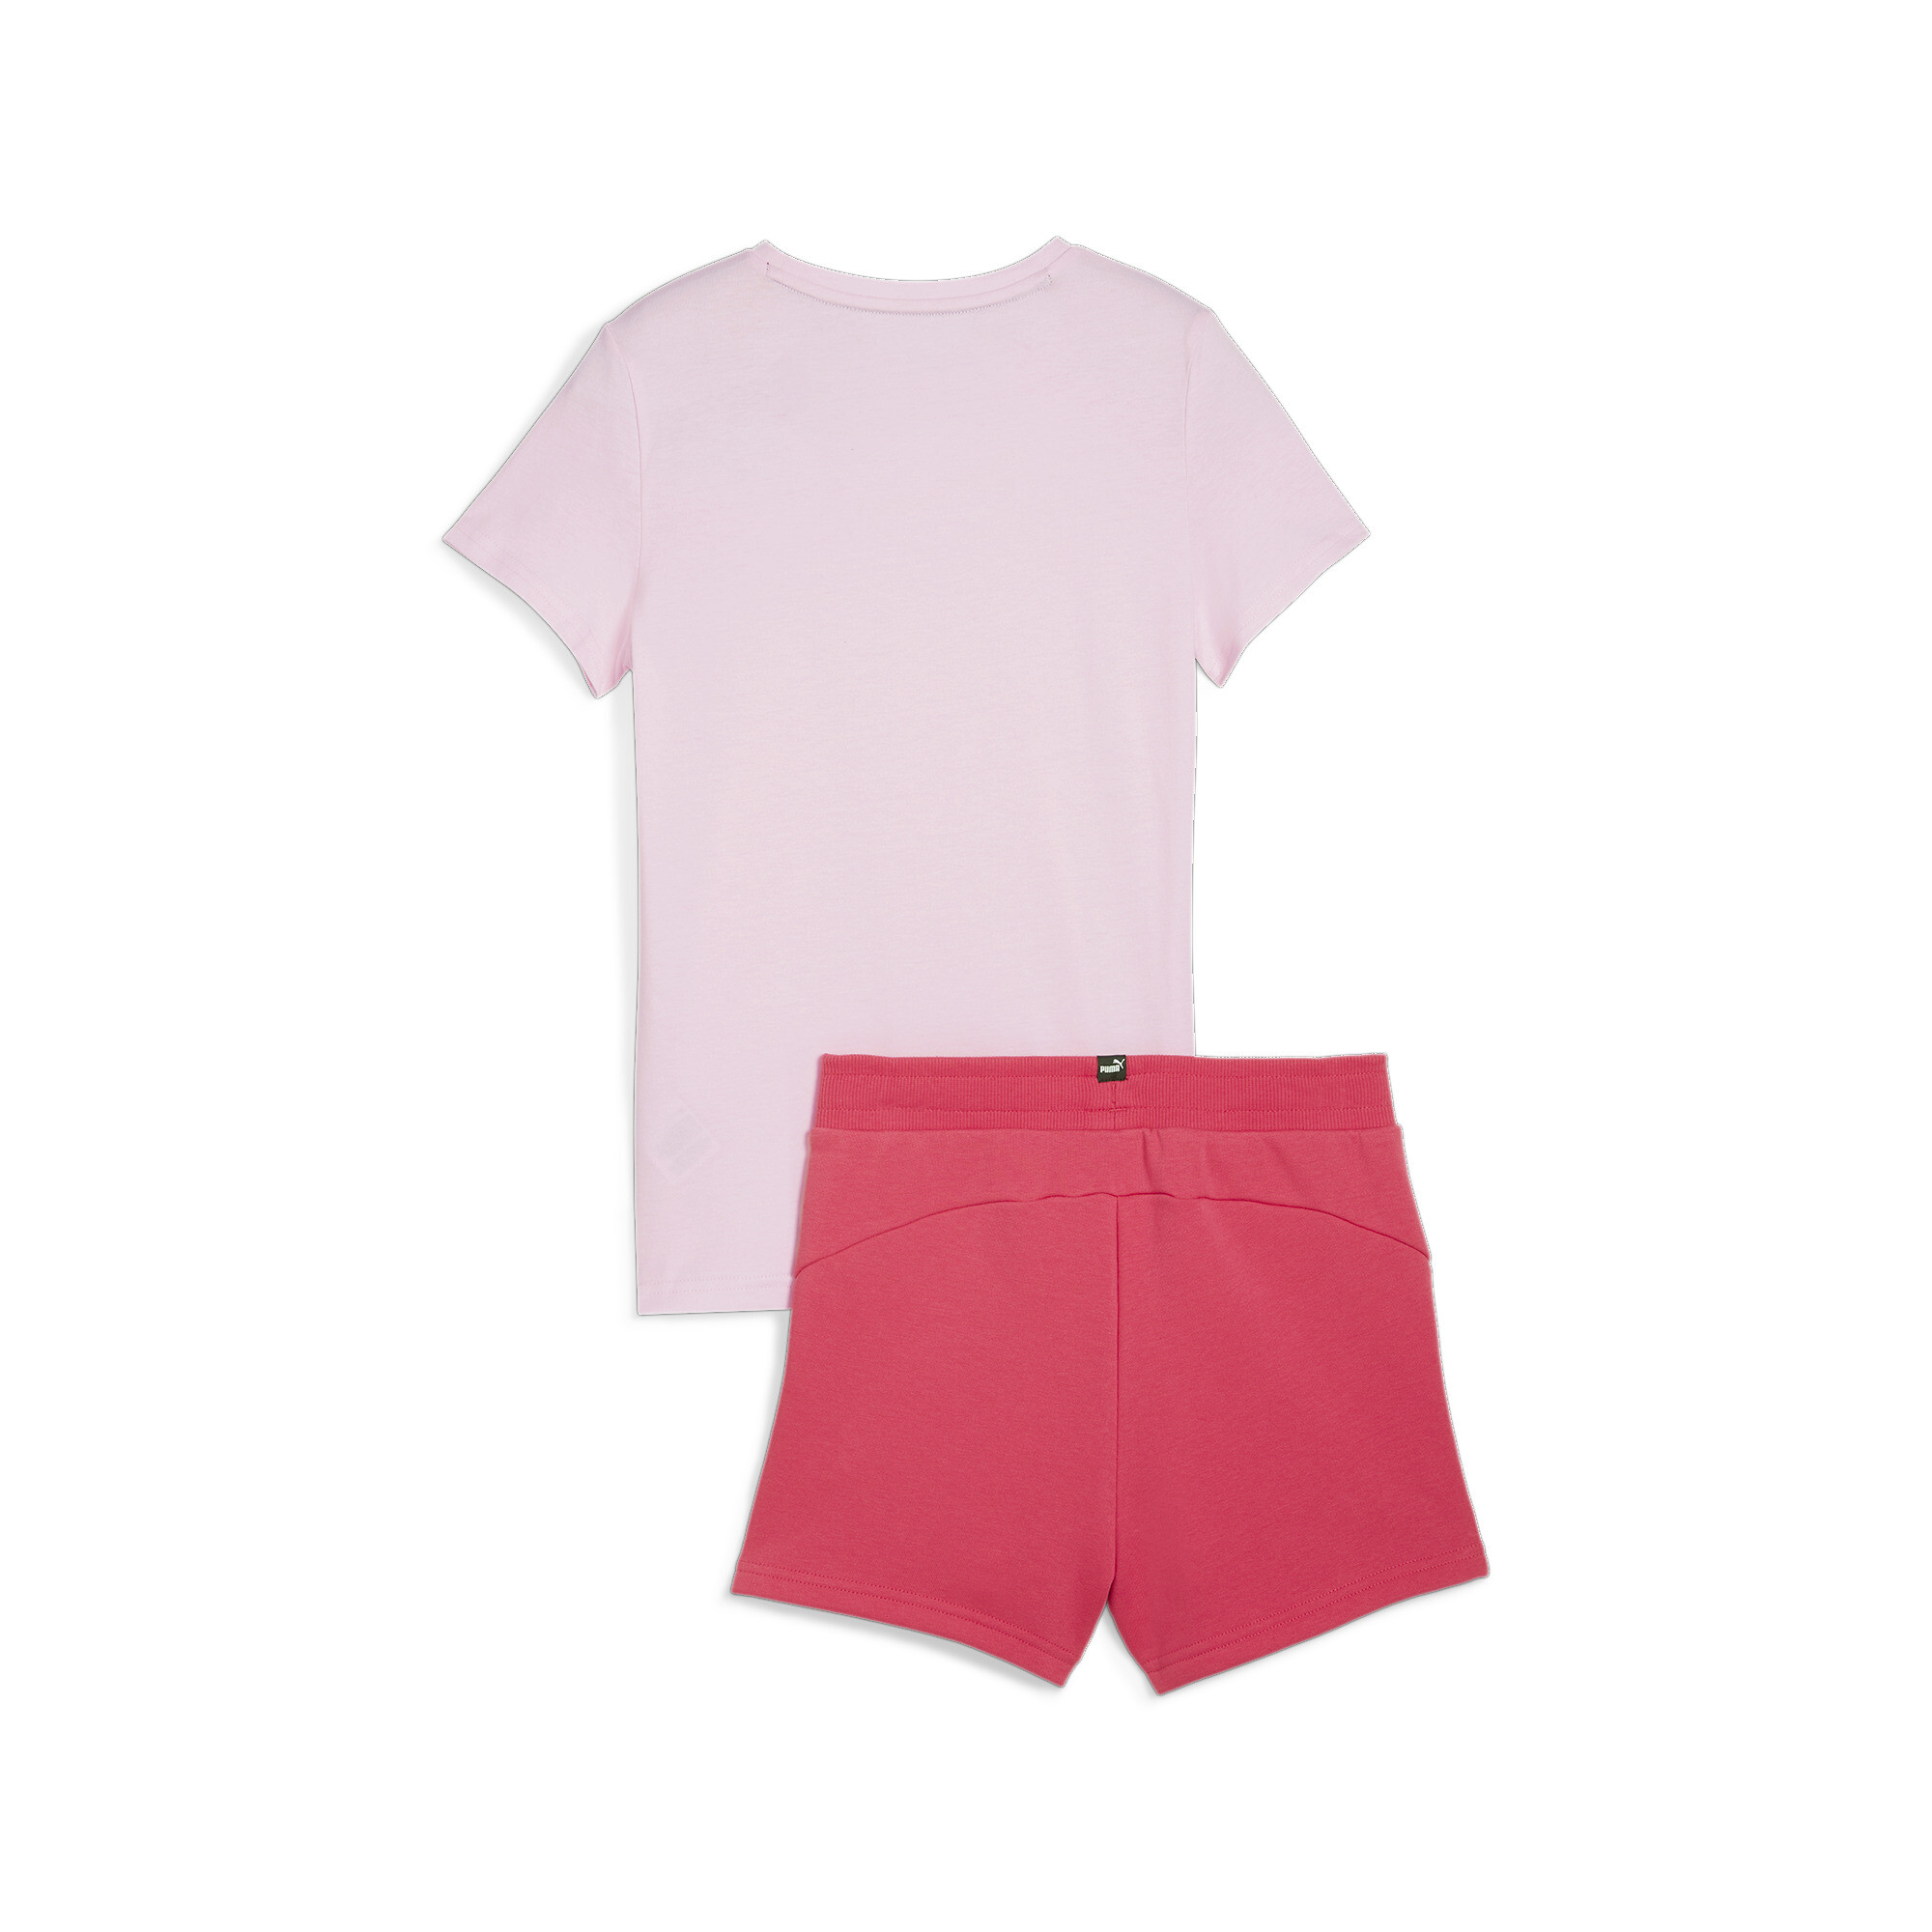 Women's Puma Logo Tee And Shorts Youth Set, Pink, Size 9-10Y, Clothing